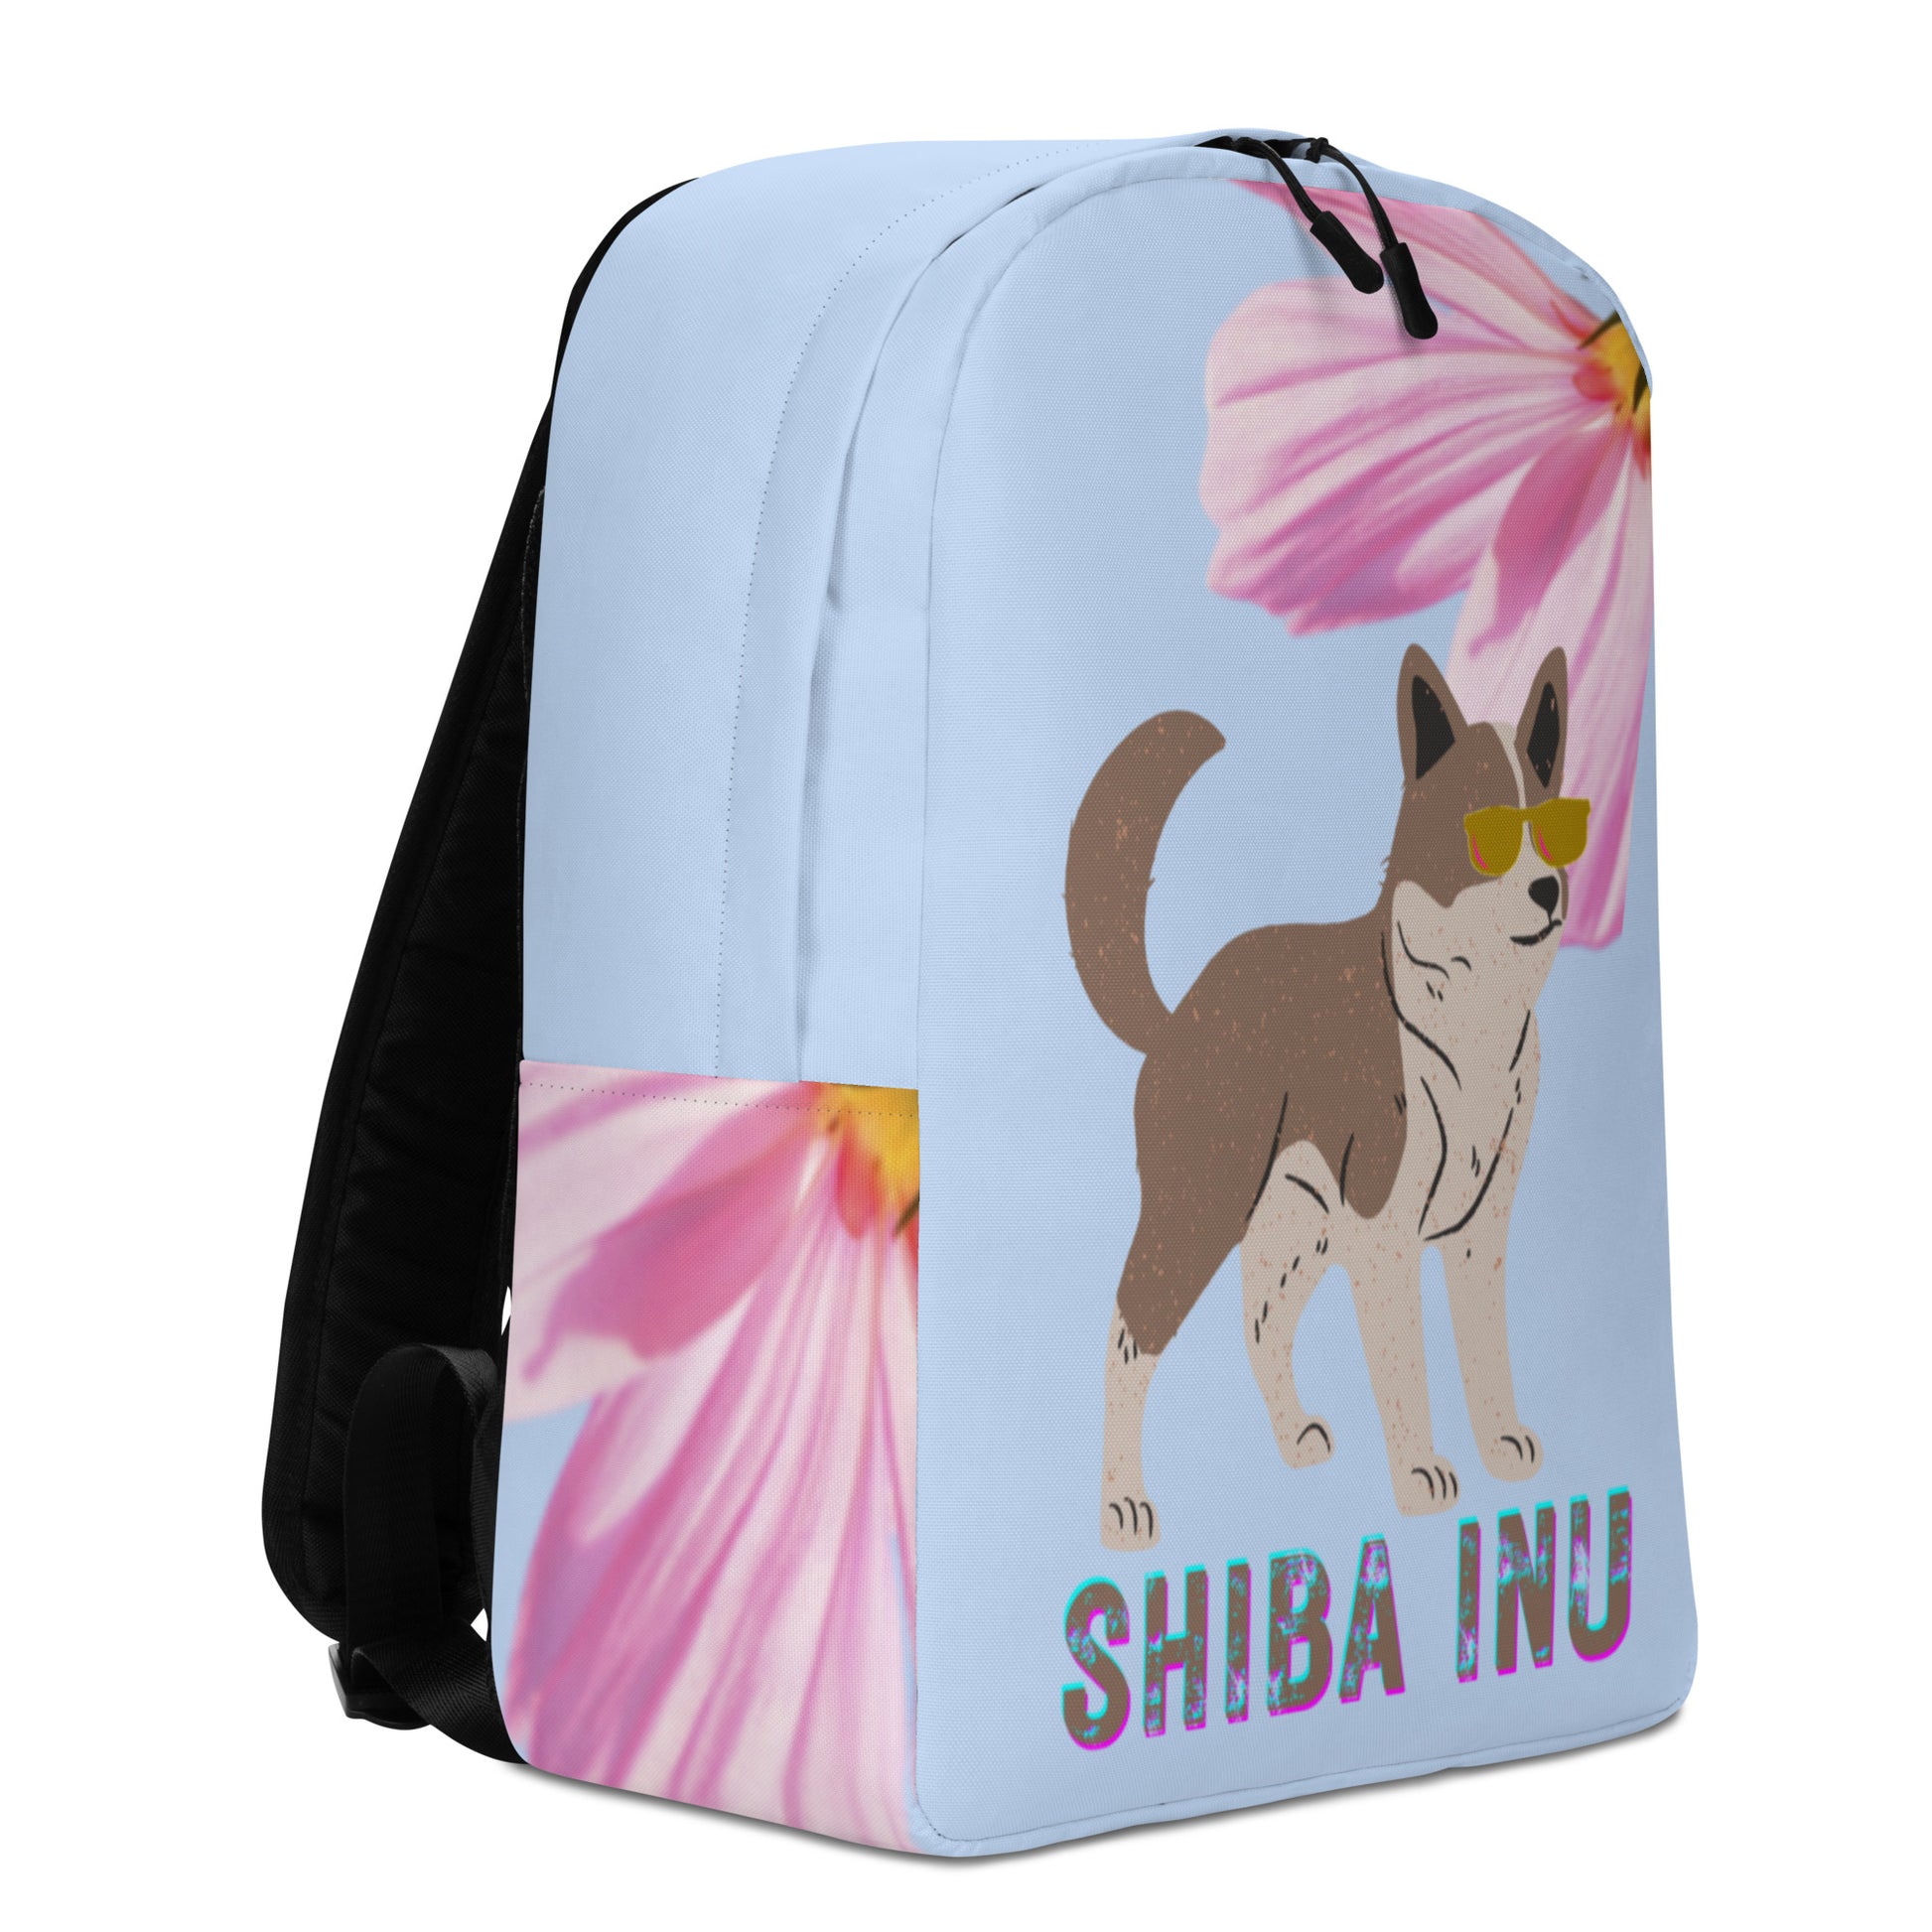 Buy Shiba Inu Minimalist Backpack | BKLA | Shoes & Accessories | shoes, hats, phone covers, tote bags, clutch bags